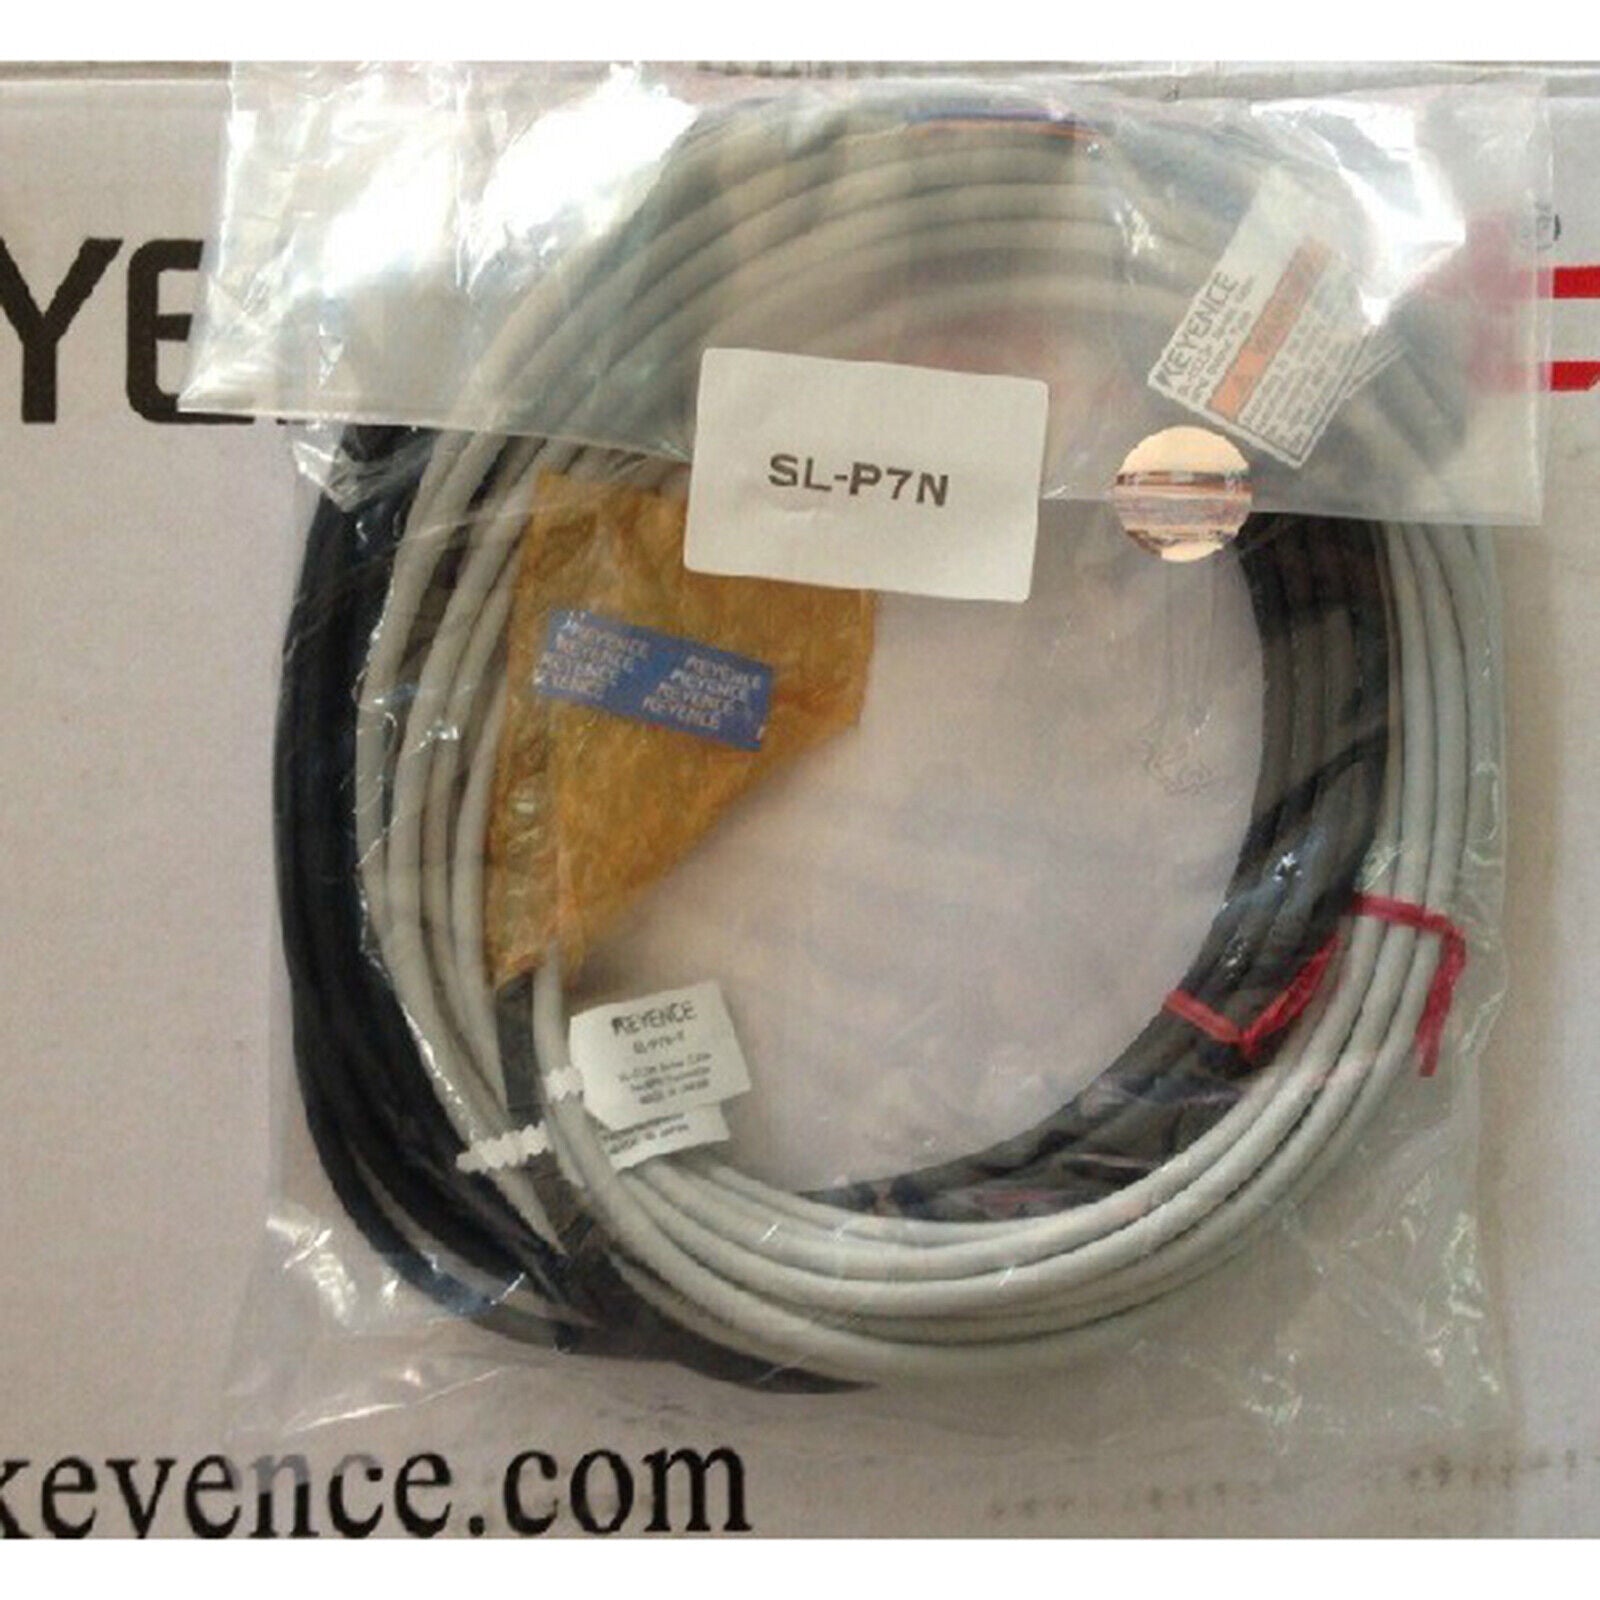 new ONE   KEYENCE Safety grating cable SL-P7N ONE Year